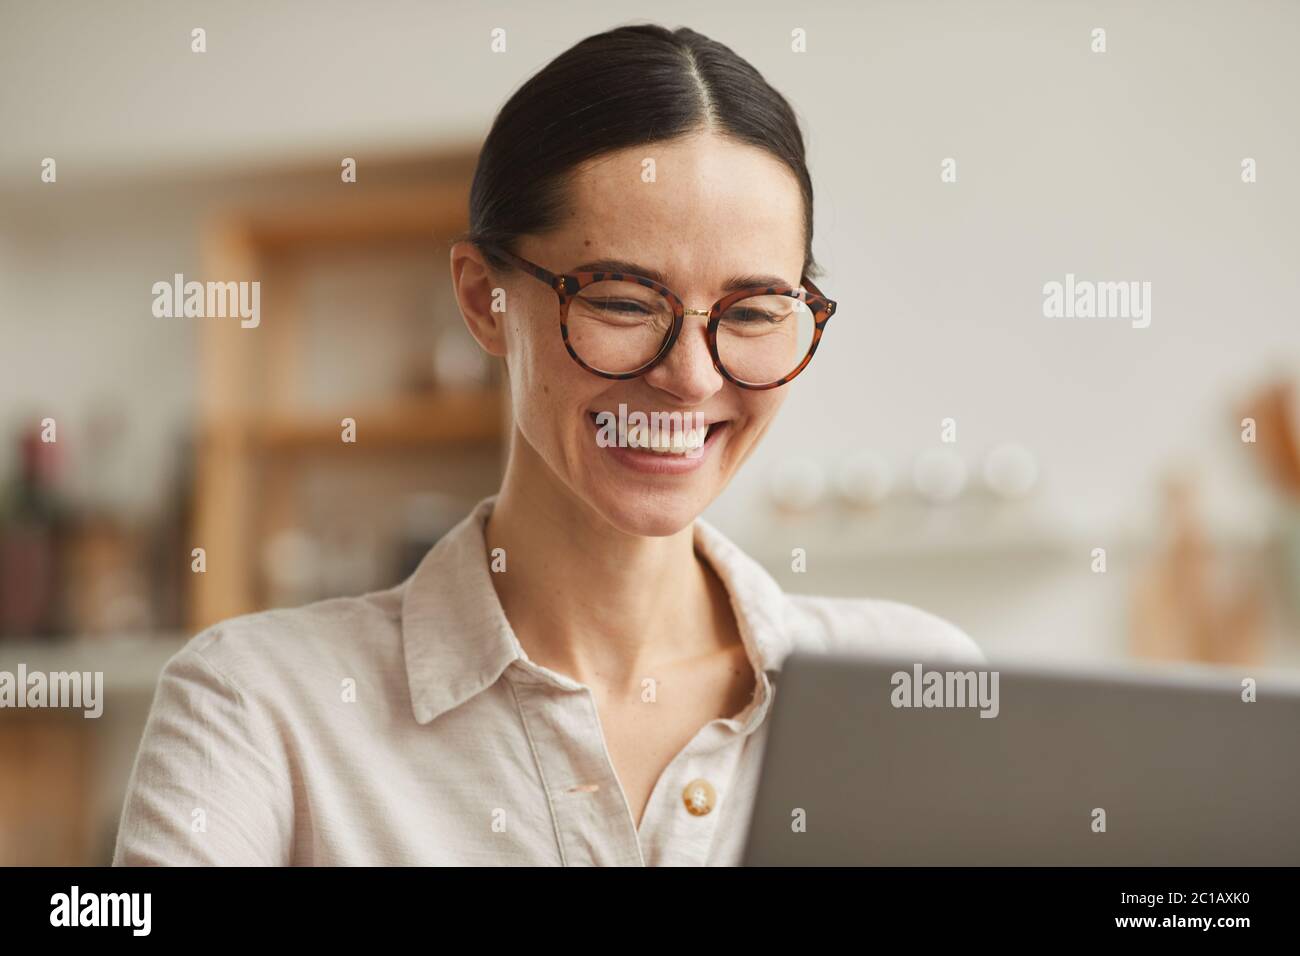 Warm-toned portrait of young businesswoman wearing glasses smiling happily while looking at laptop screen, copy space Stock Photo